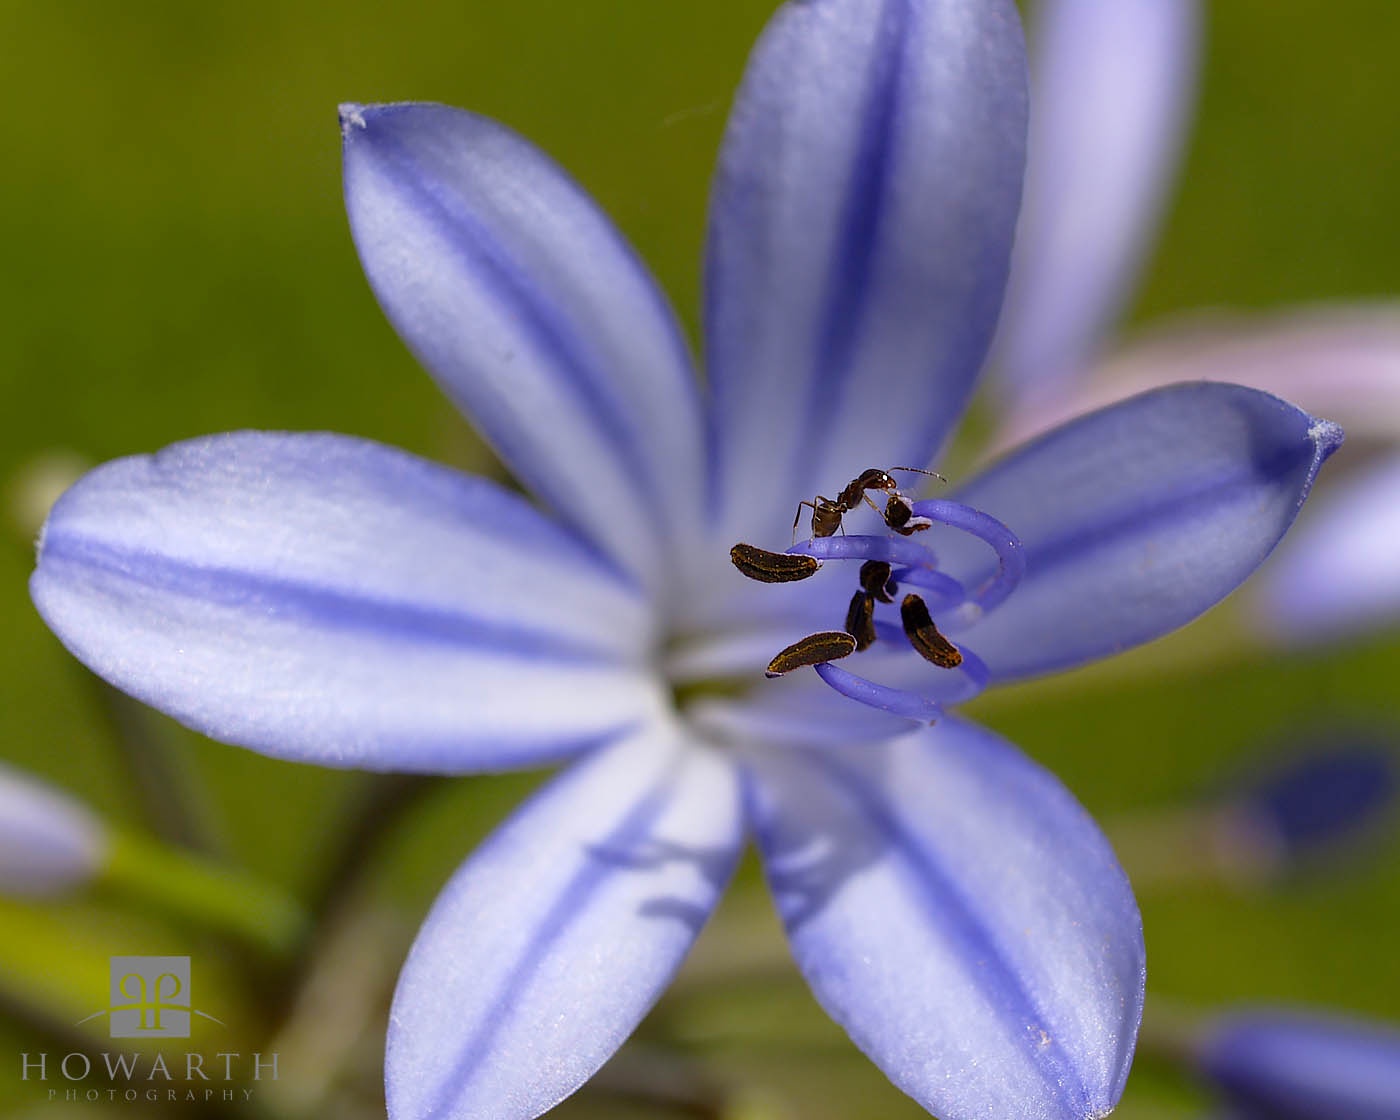 An ant working away on an Agapanthus flower